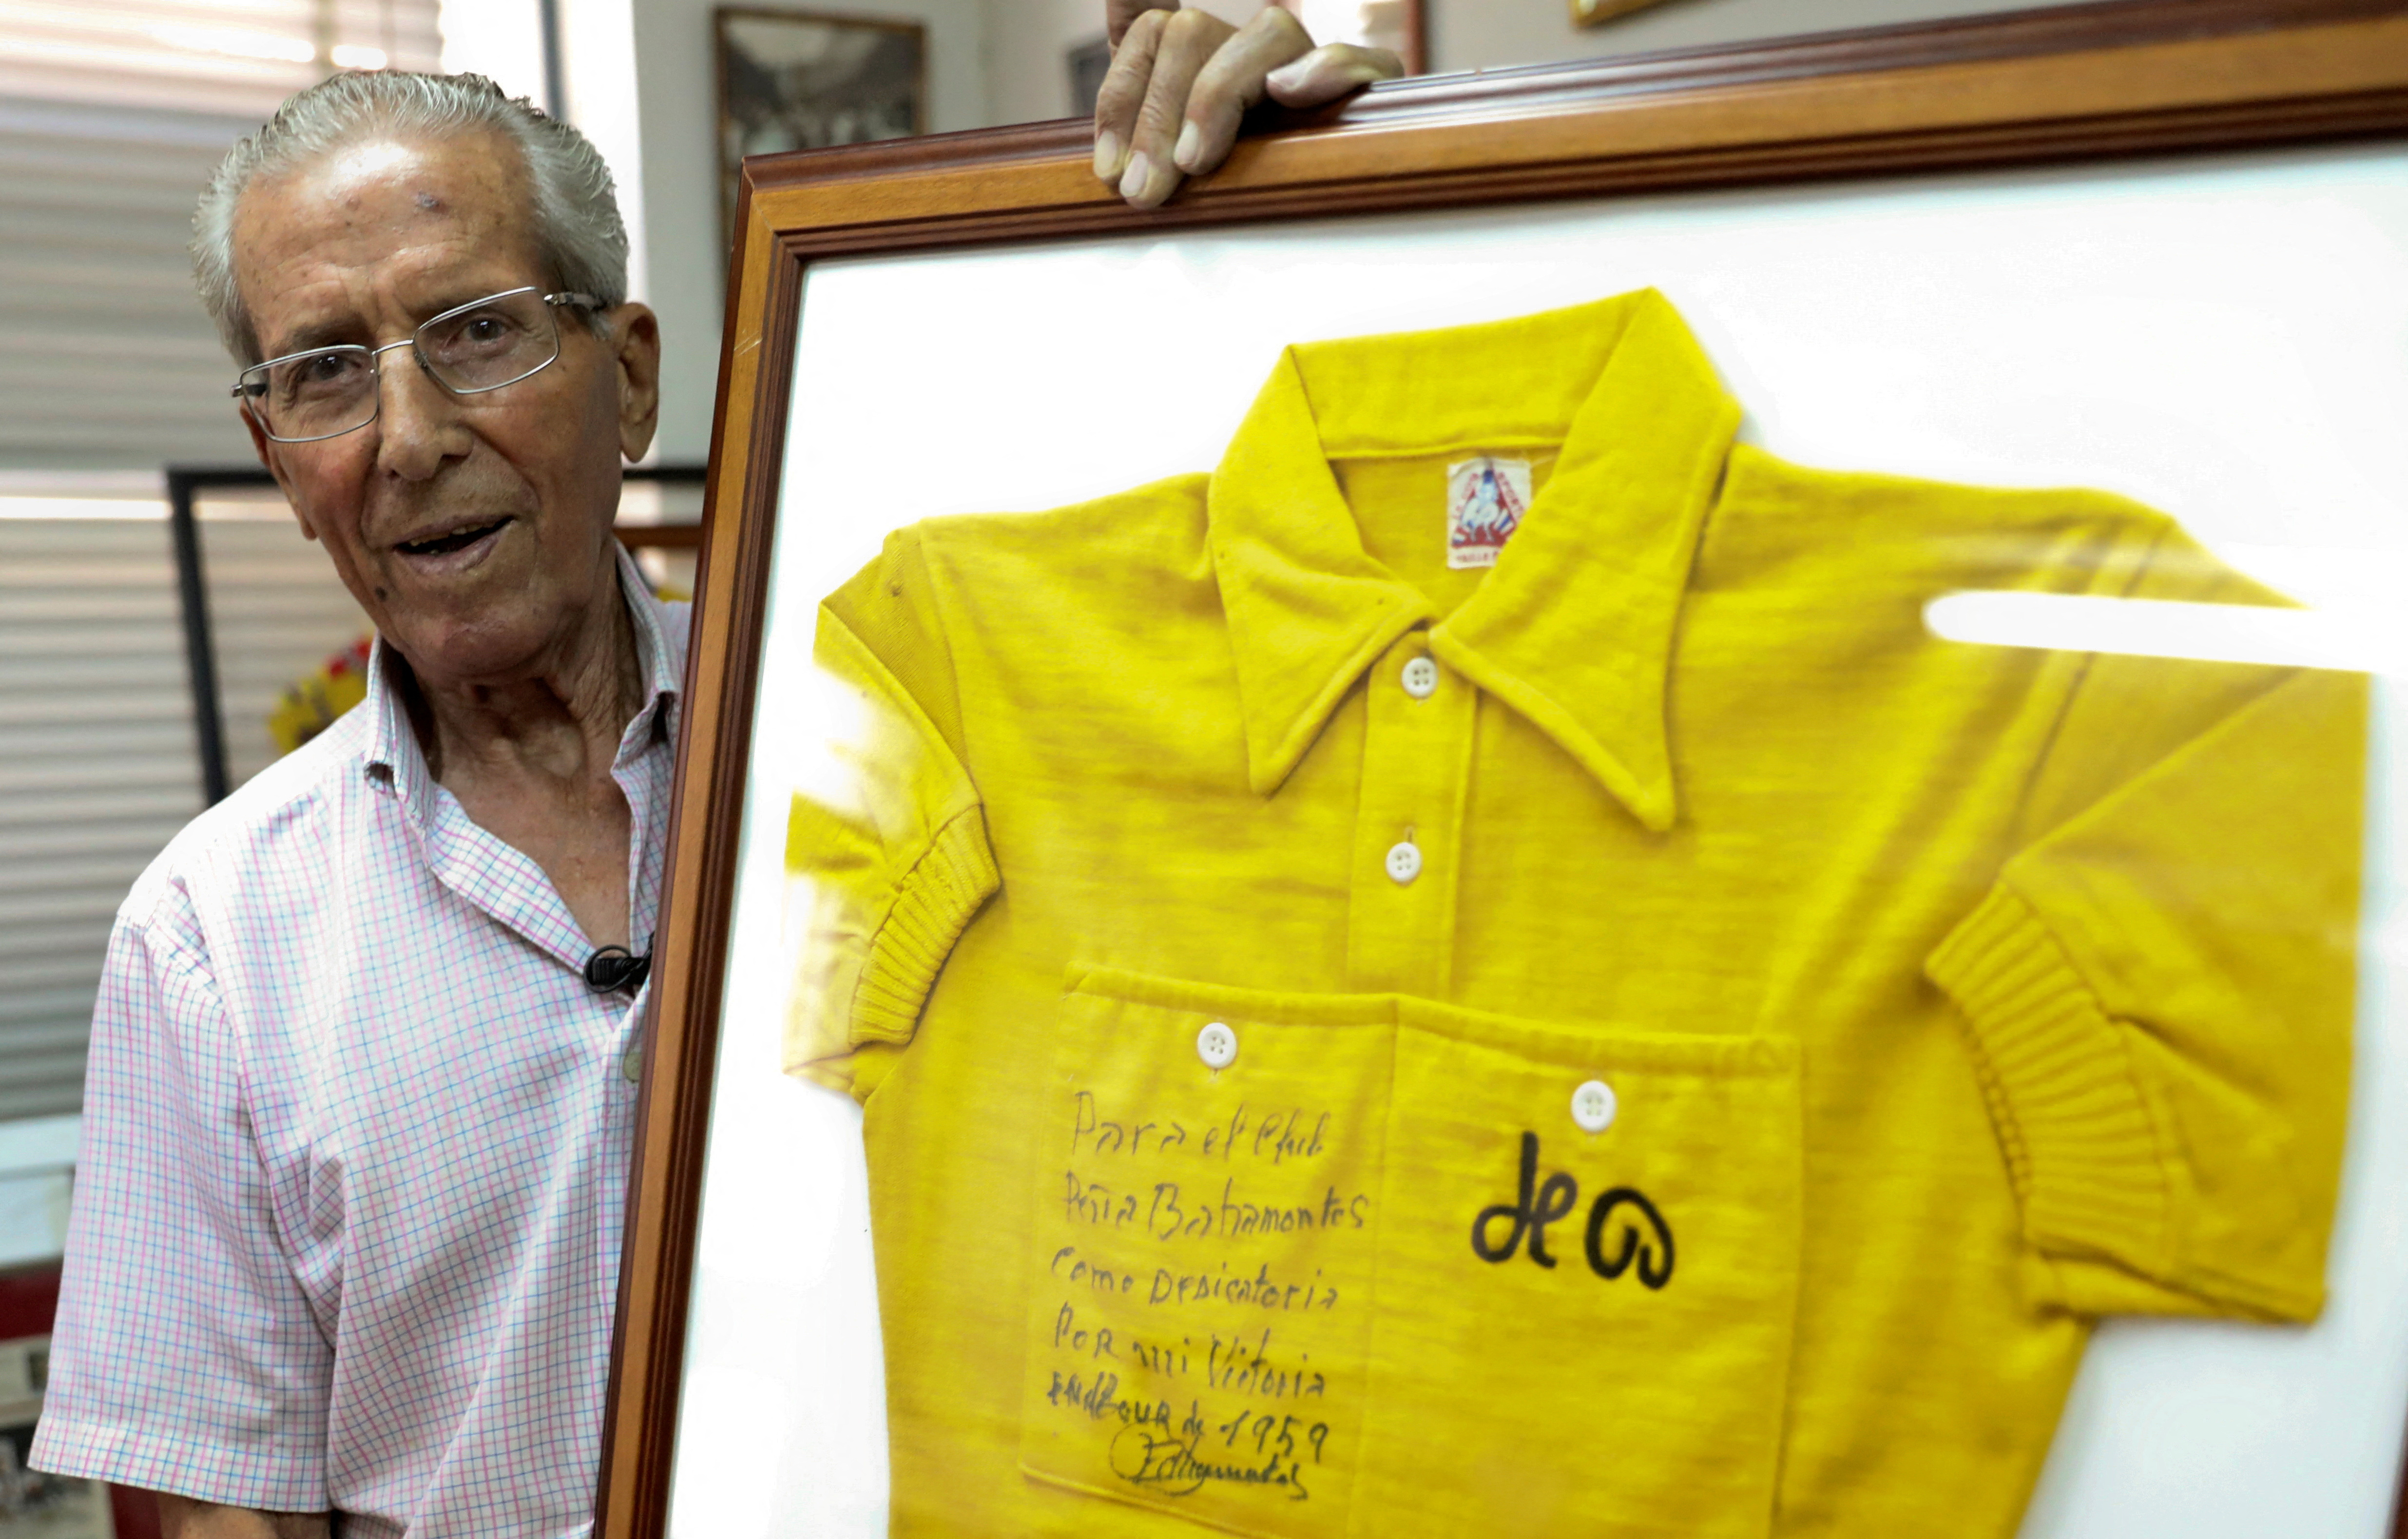 Bahamontes, 91, poses with his original yellow jersey at his fans club headquarters in Toledo